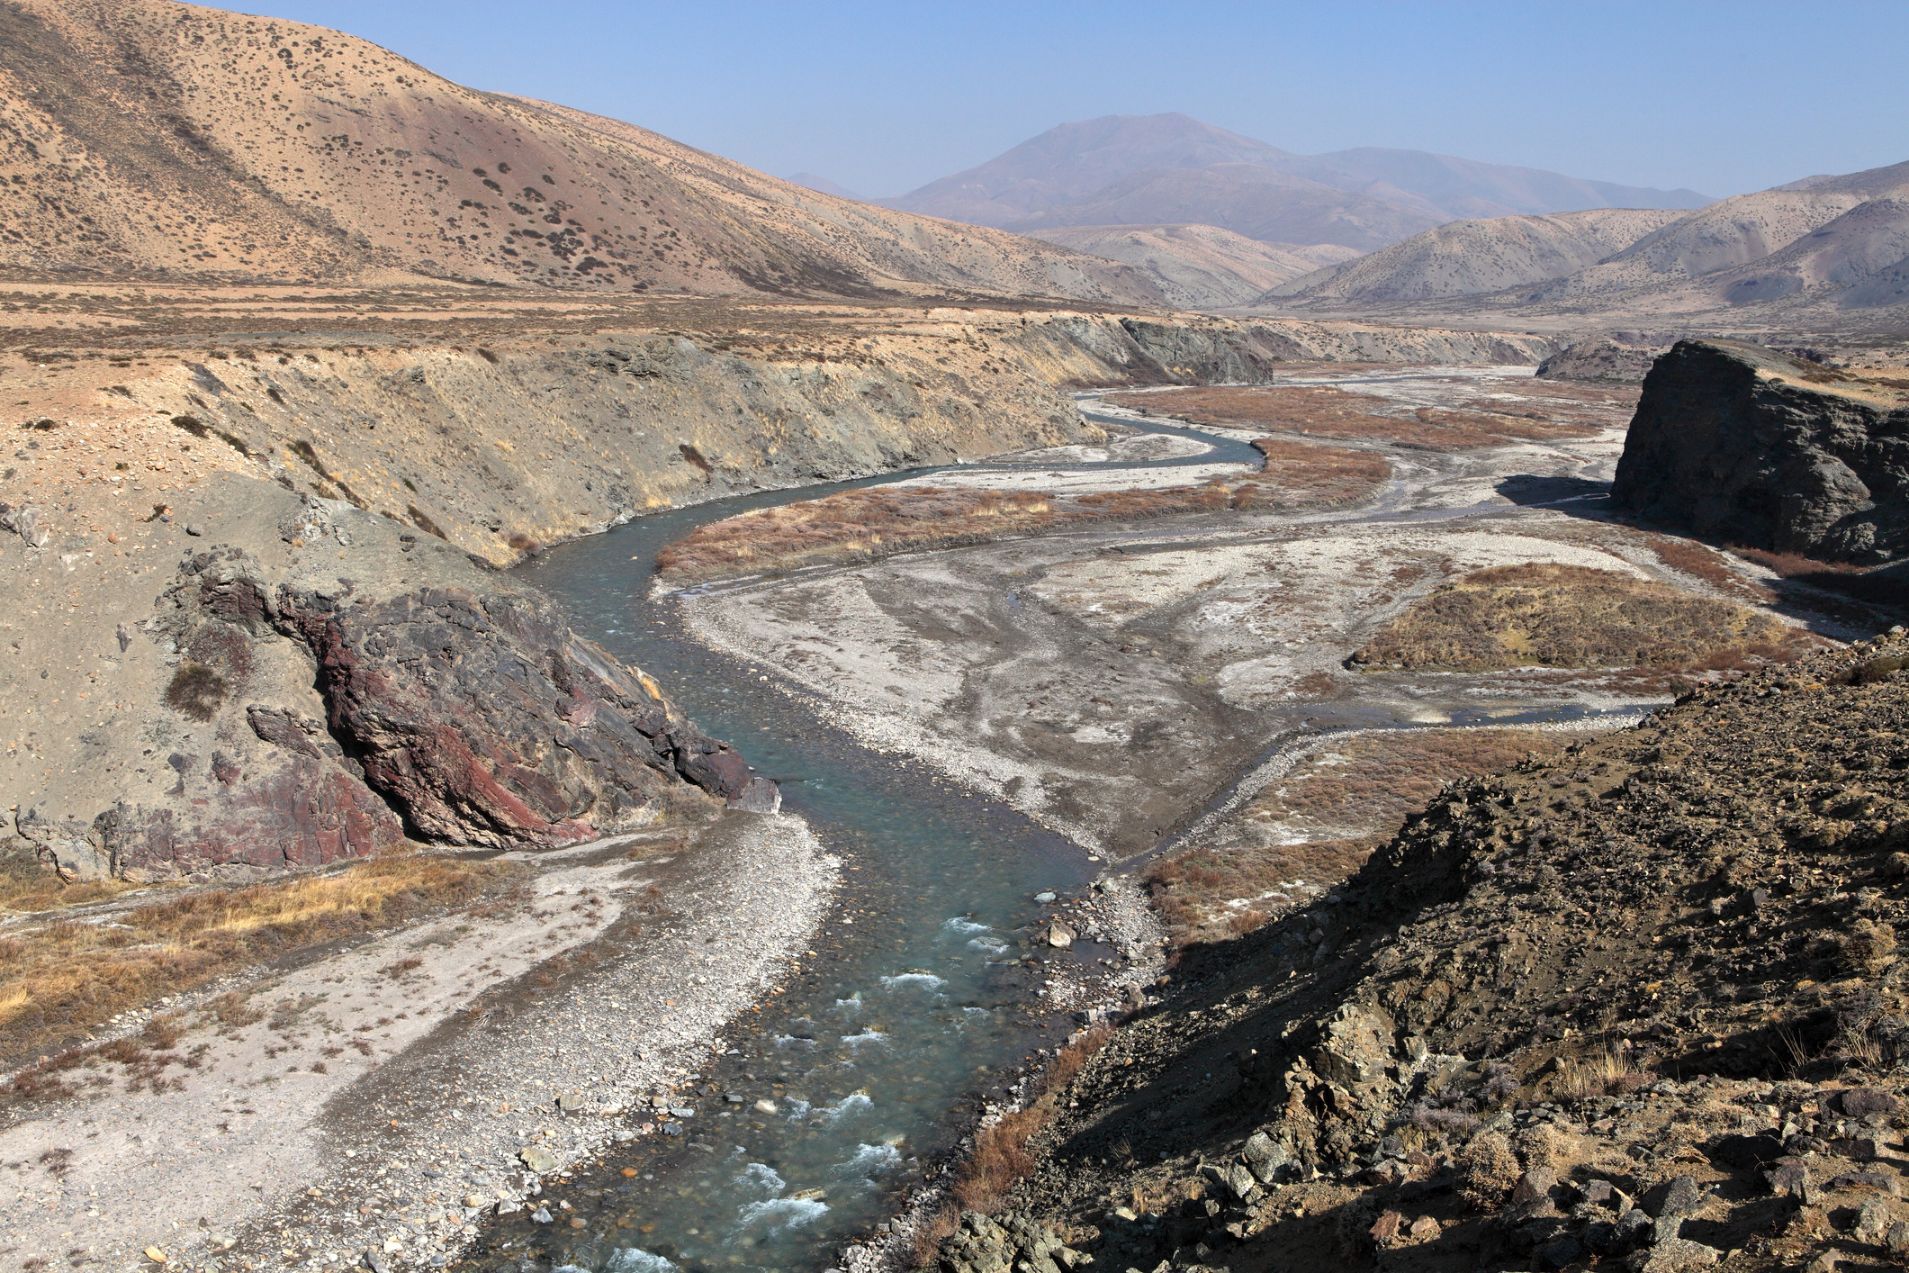 The Karnali River, running through the arid landscapes of western Nepal and Tibet. Photo: Getty